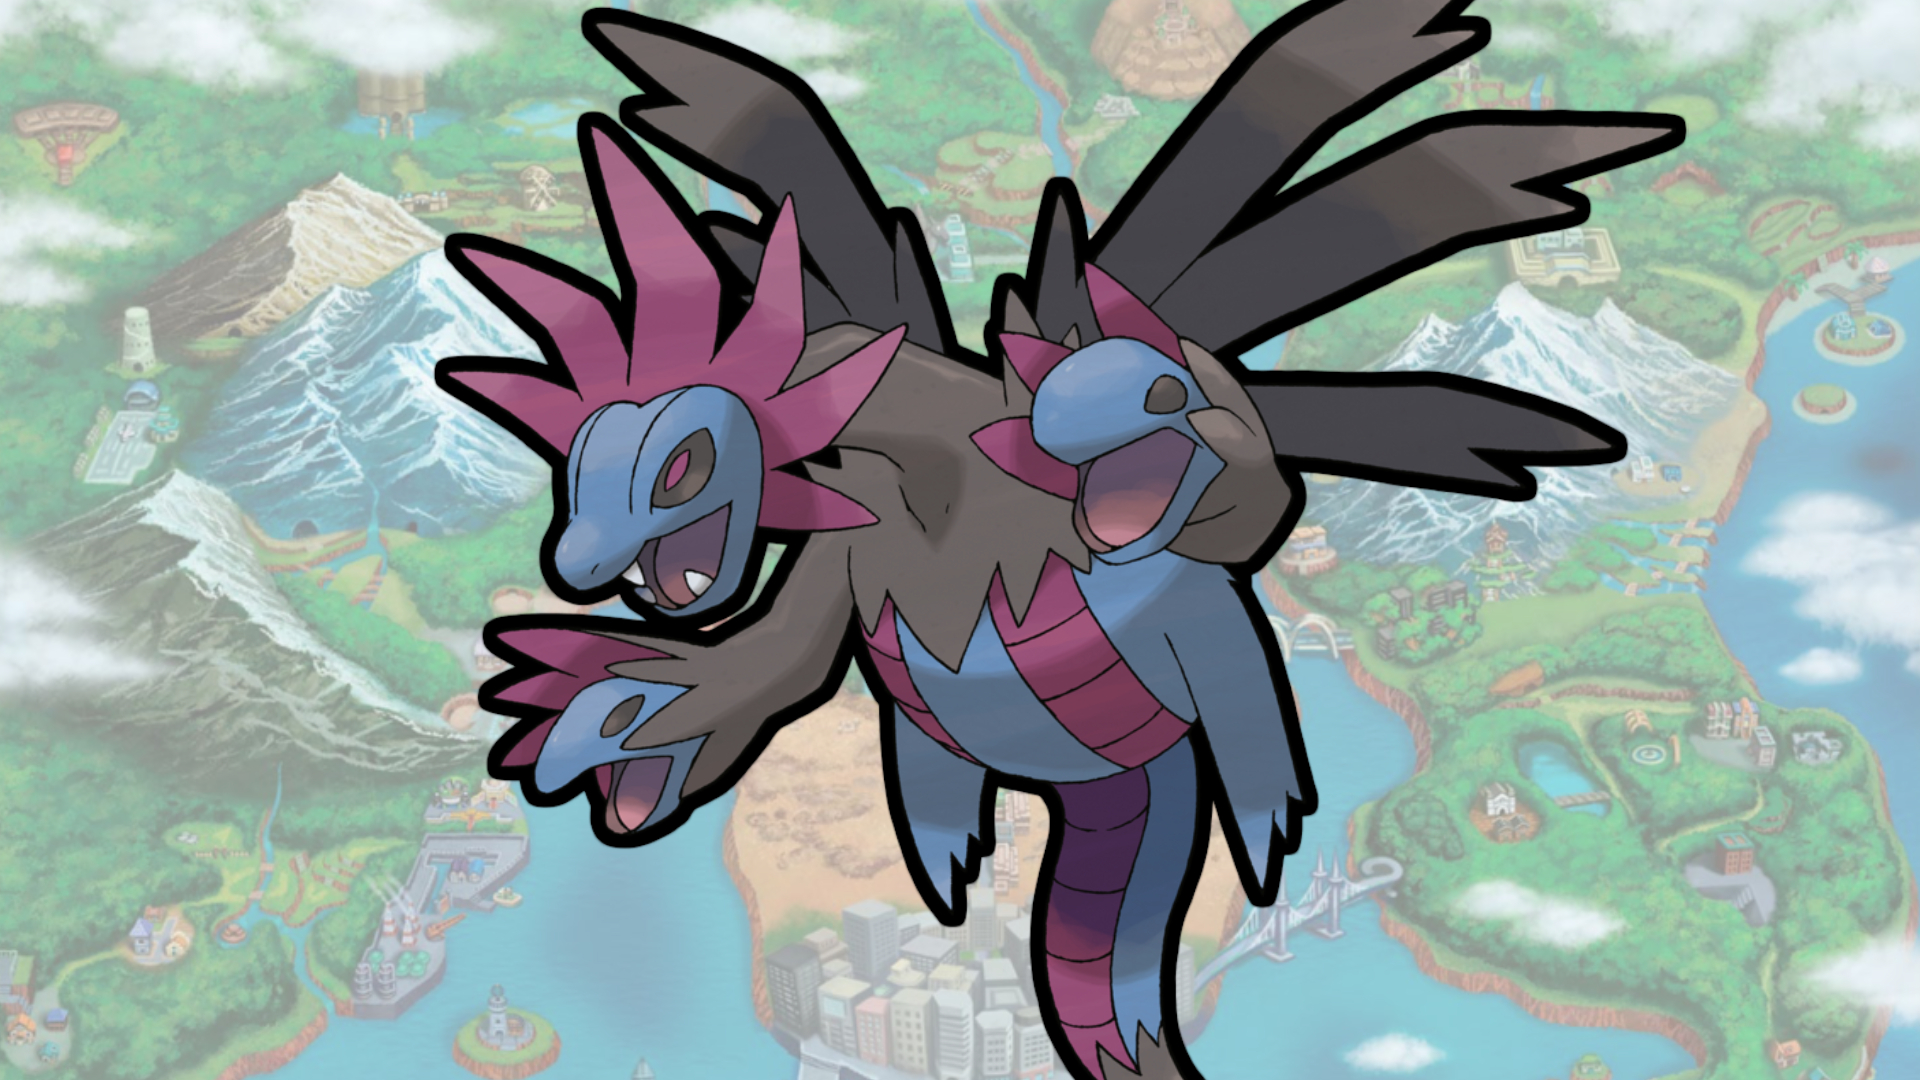 Hydreigon (Pokémon GO) - Best Movesets, Counters, Evolutions and CP